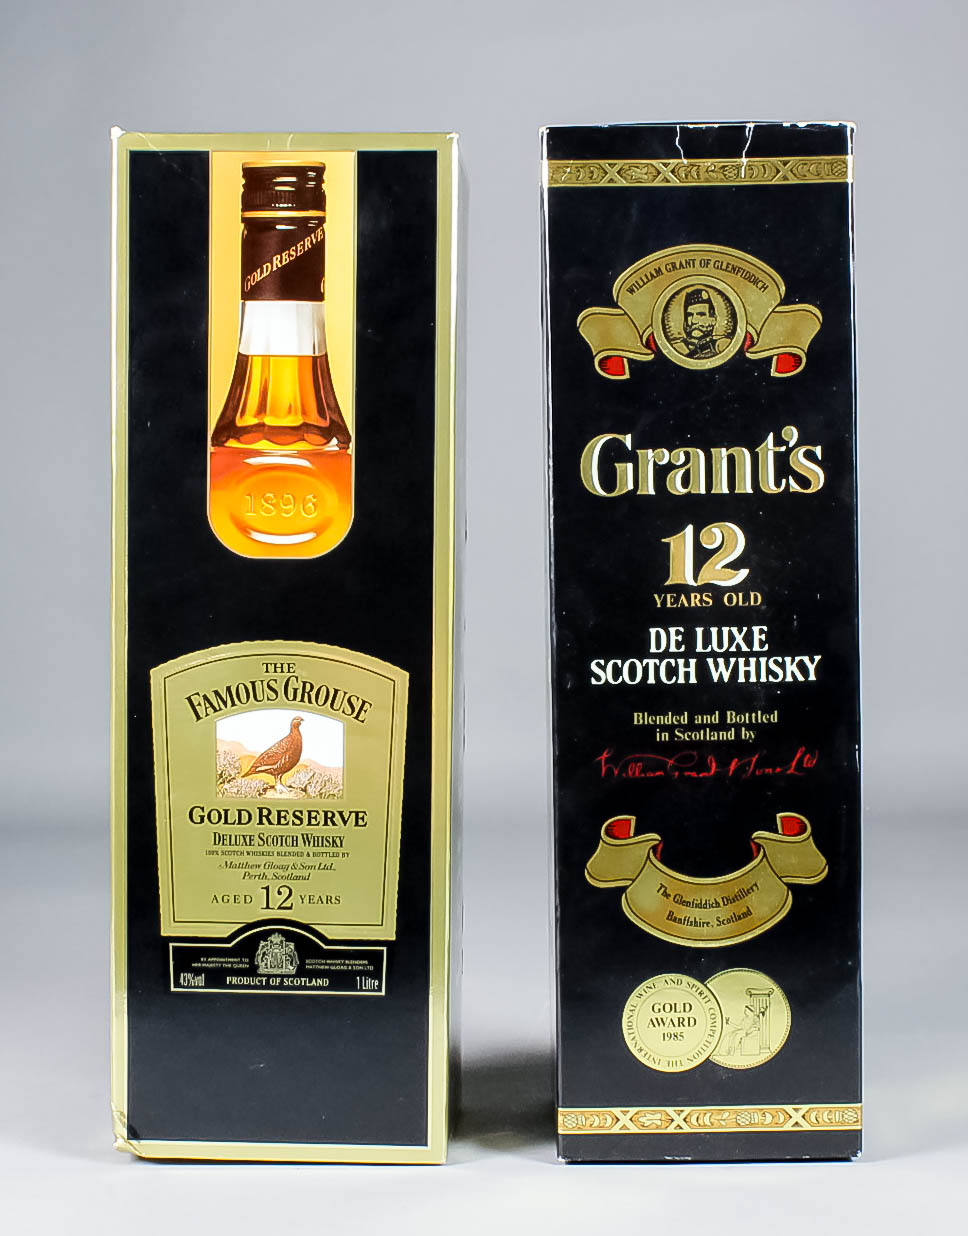 Six one litre bottles of Bell's Old Scotch Whisky (43% proof), three one litre bottles of Grand